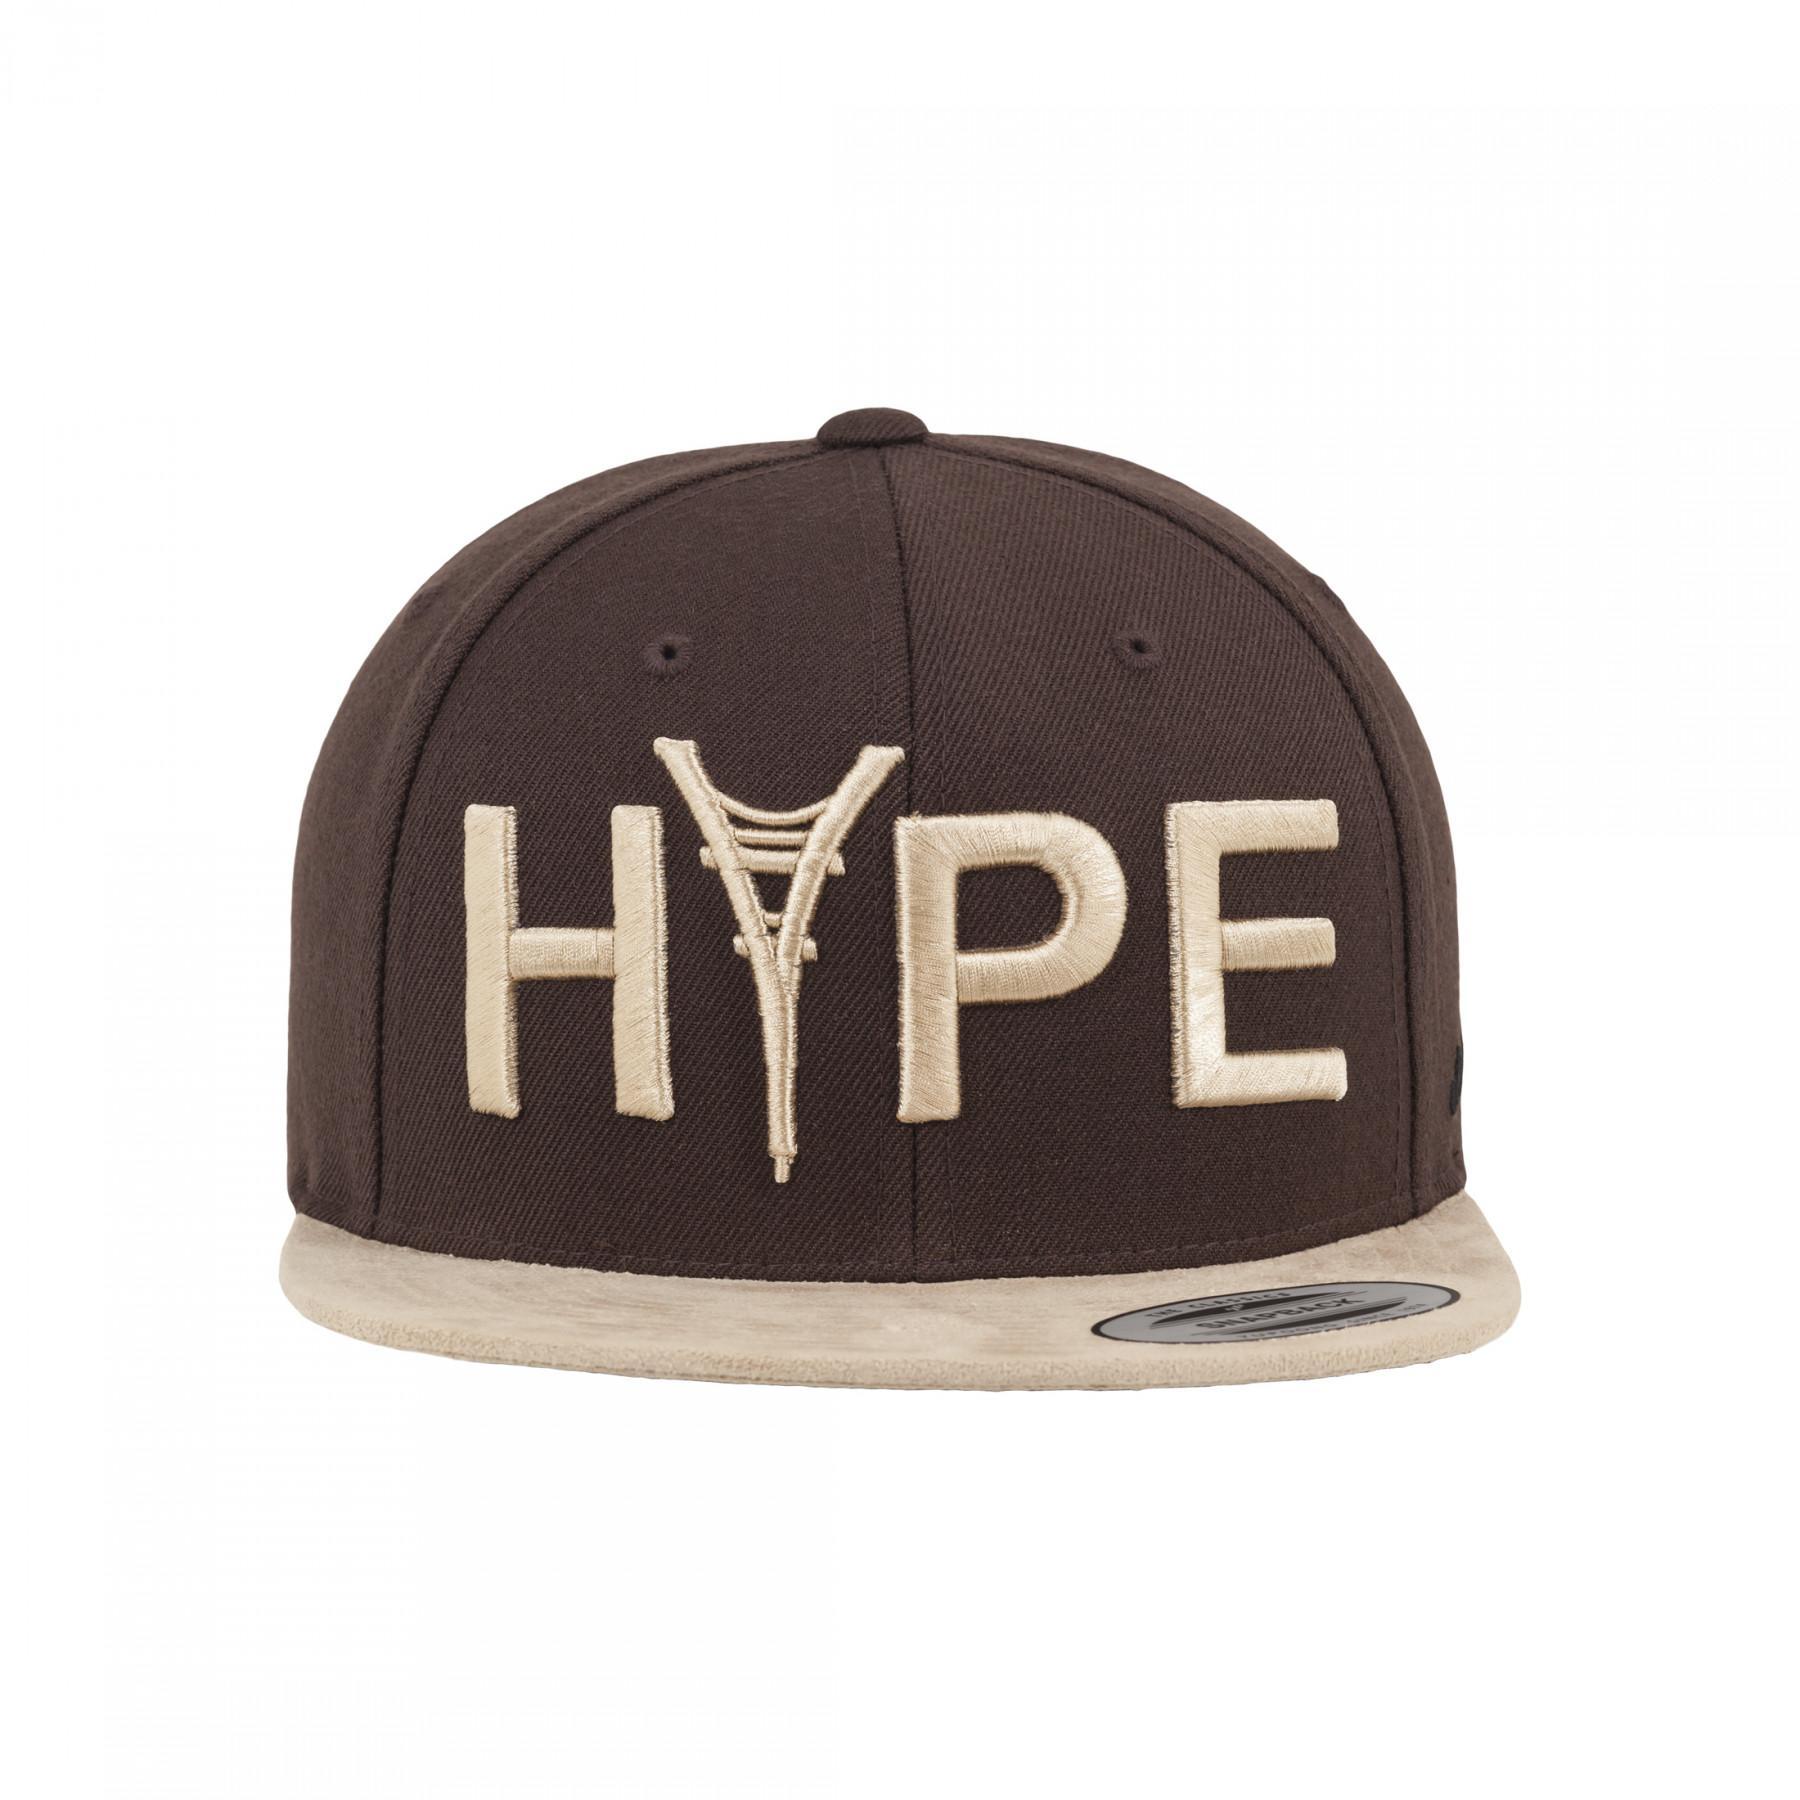 Casquette Mister Tee hype